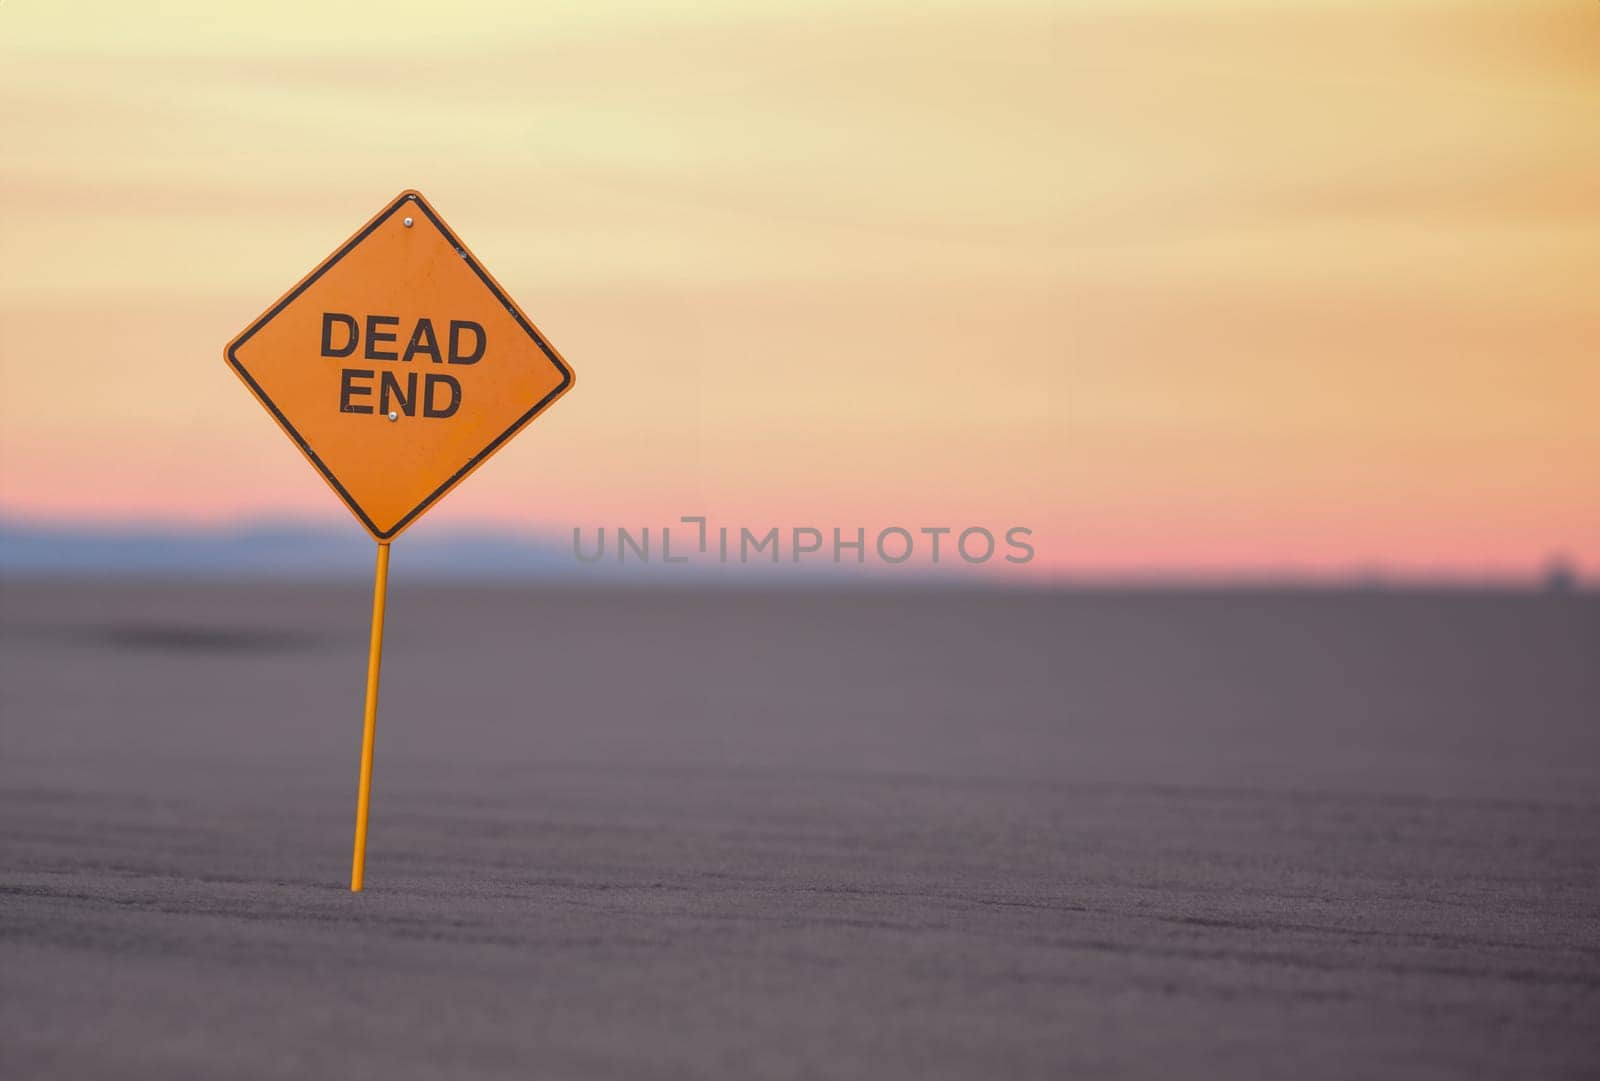 A Dead End Sign In The Middle Of A Barren Desert Wilderness, With Copy Space